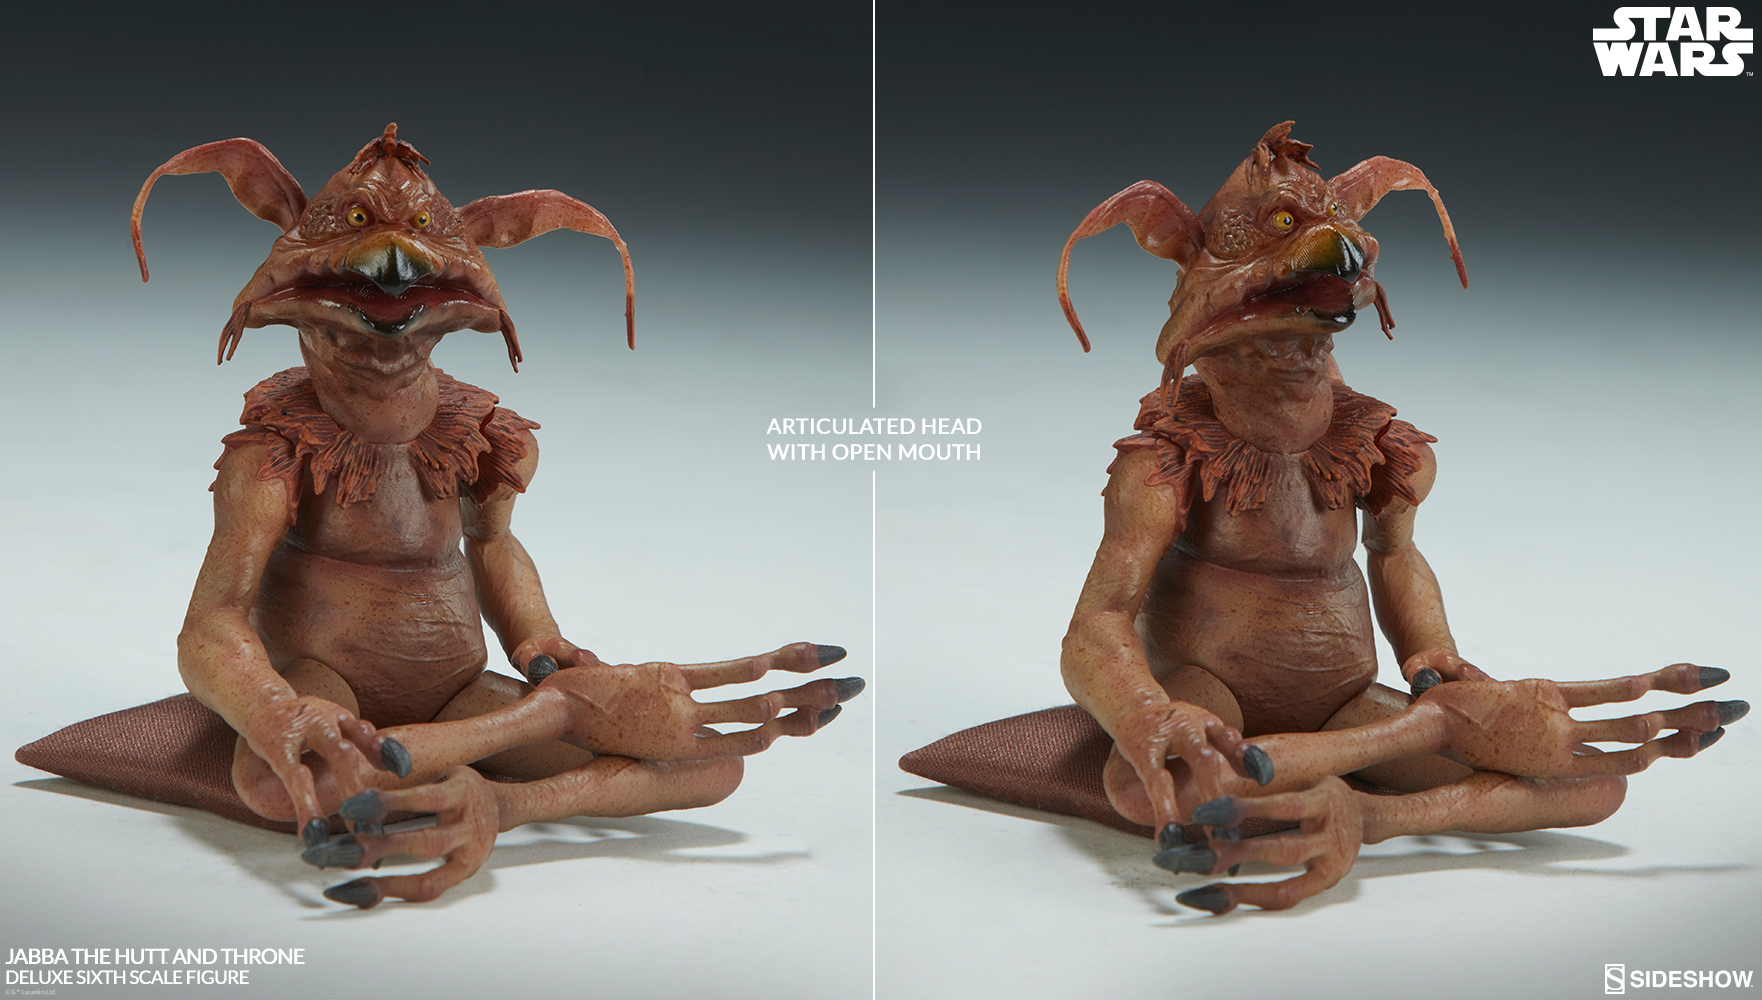 star-wars-jabba-the-hutt-and-throne-deluxe-sixth-scale-figure-sideshow-100410-26